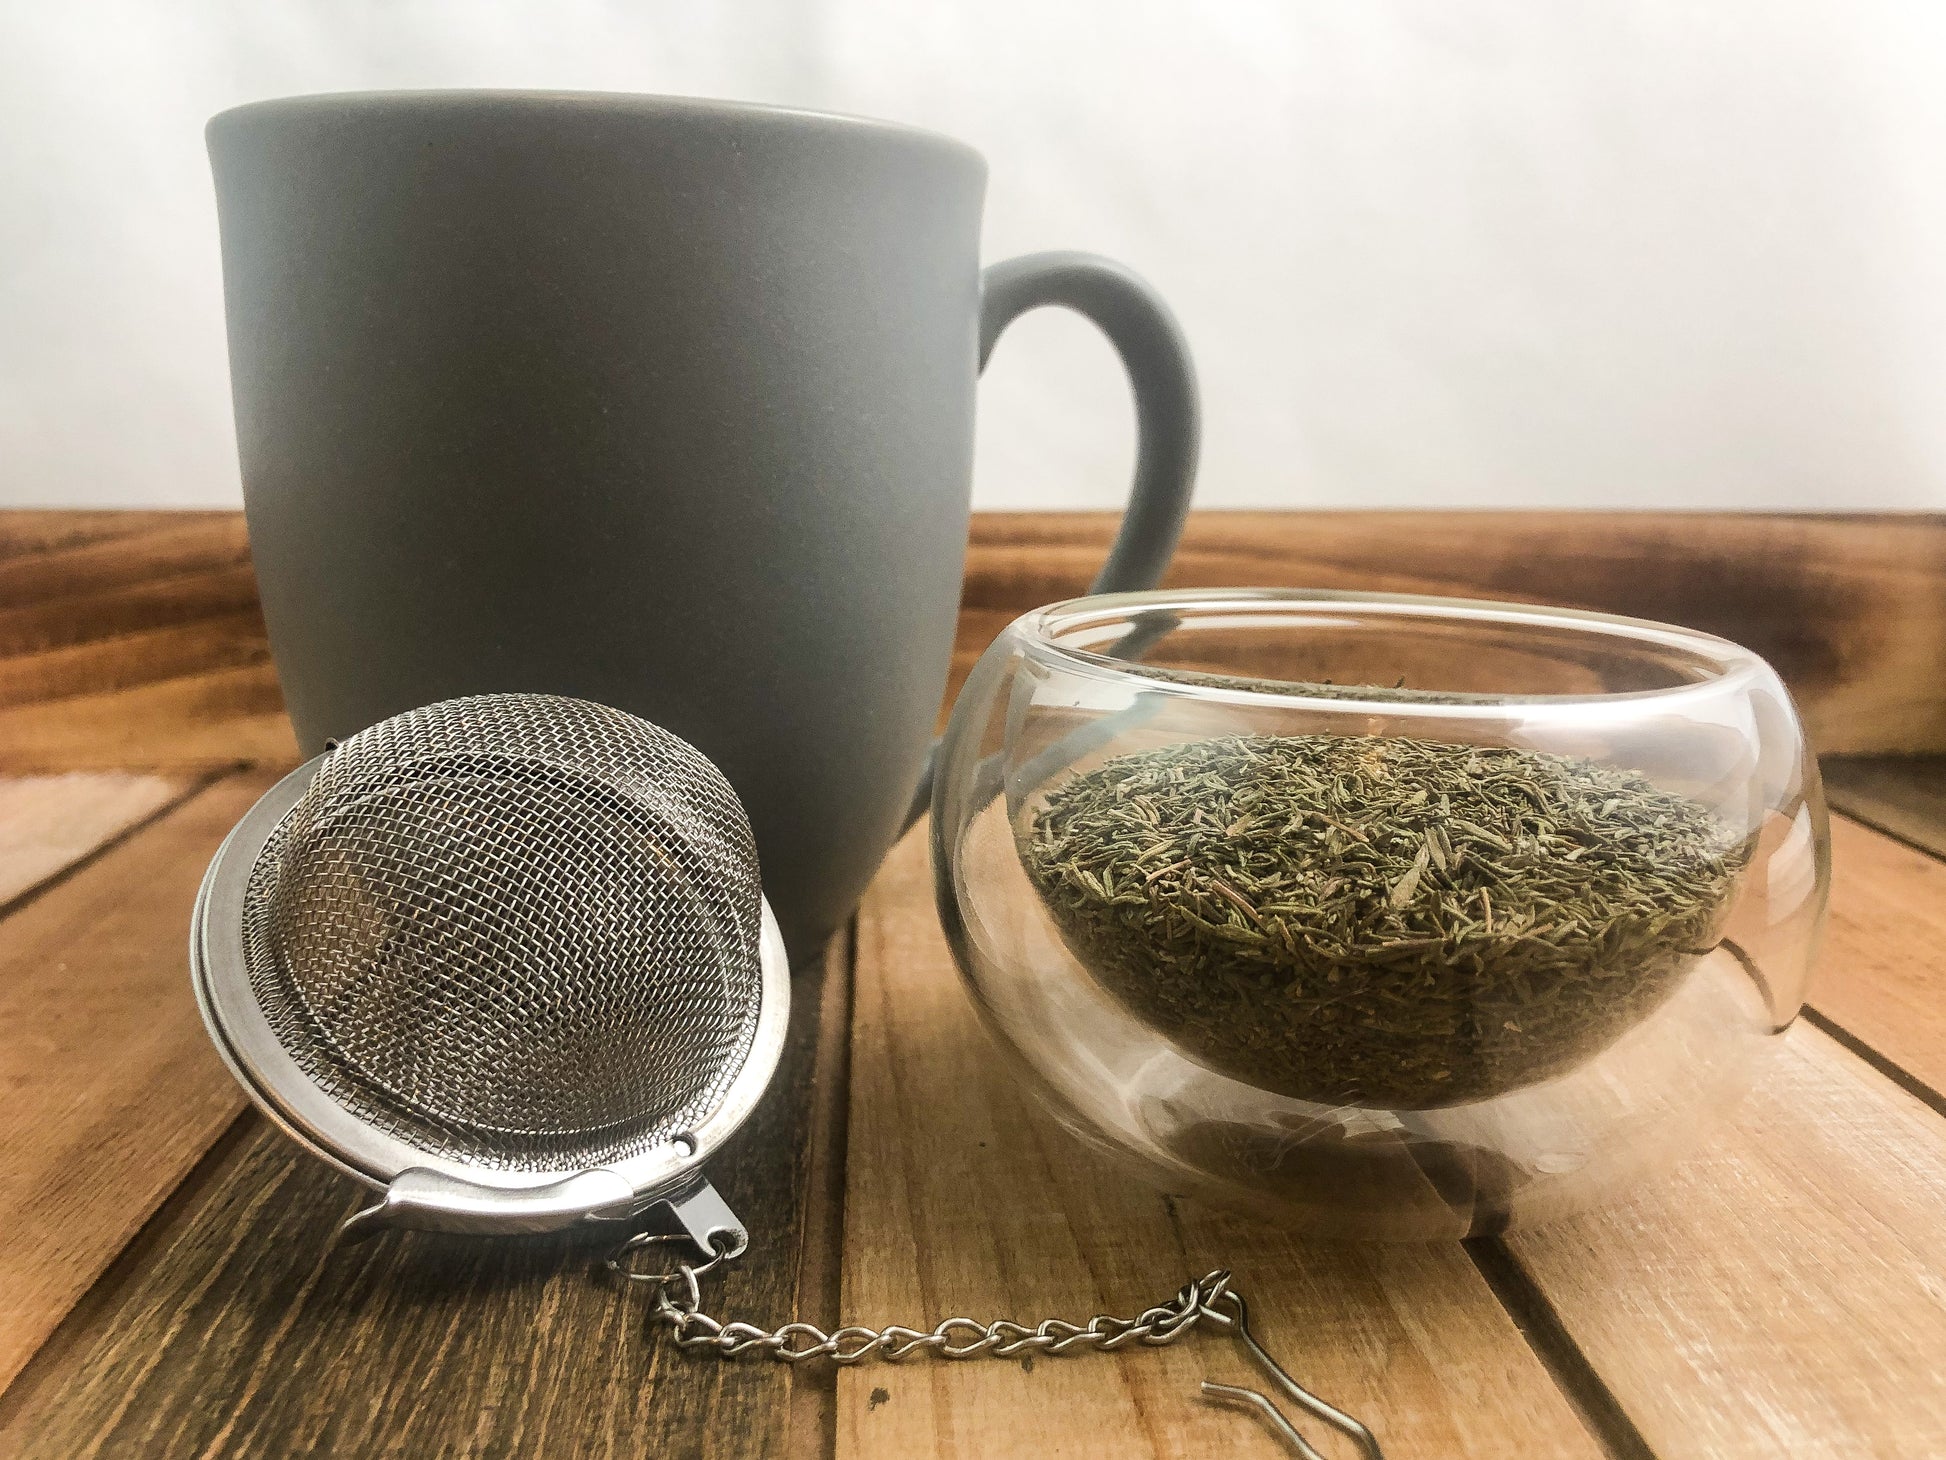 dried thyme in a clear glass cup next to a grey coffee mug and tea infuser on a wooden table with white background